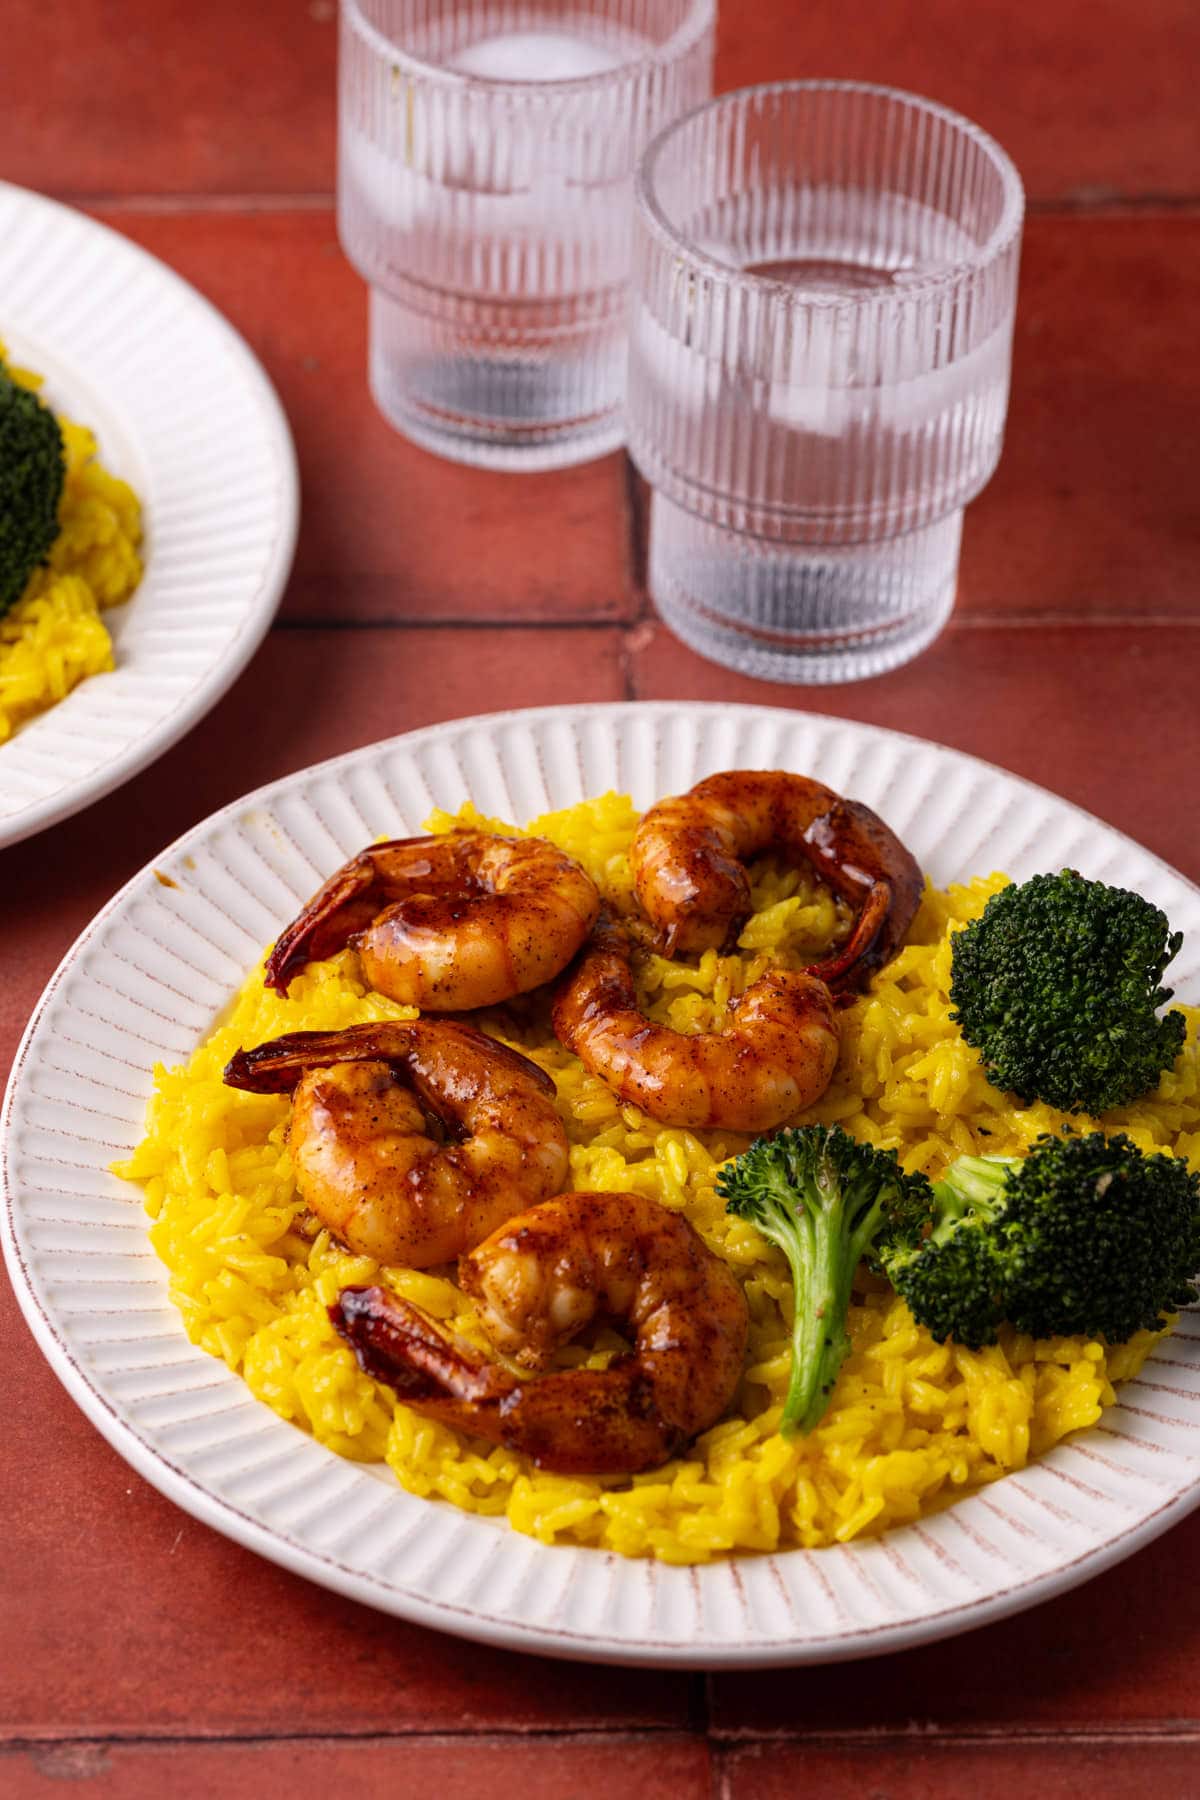 Close up of tequila lime shrimp plated on top of rice and served with roasted broccoli.